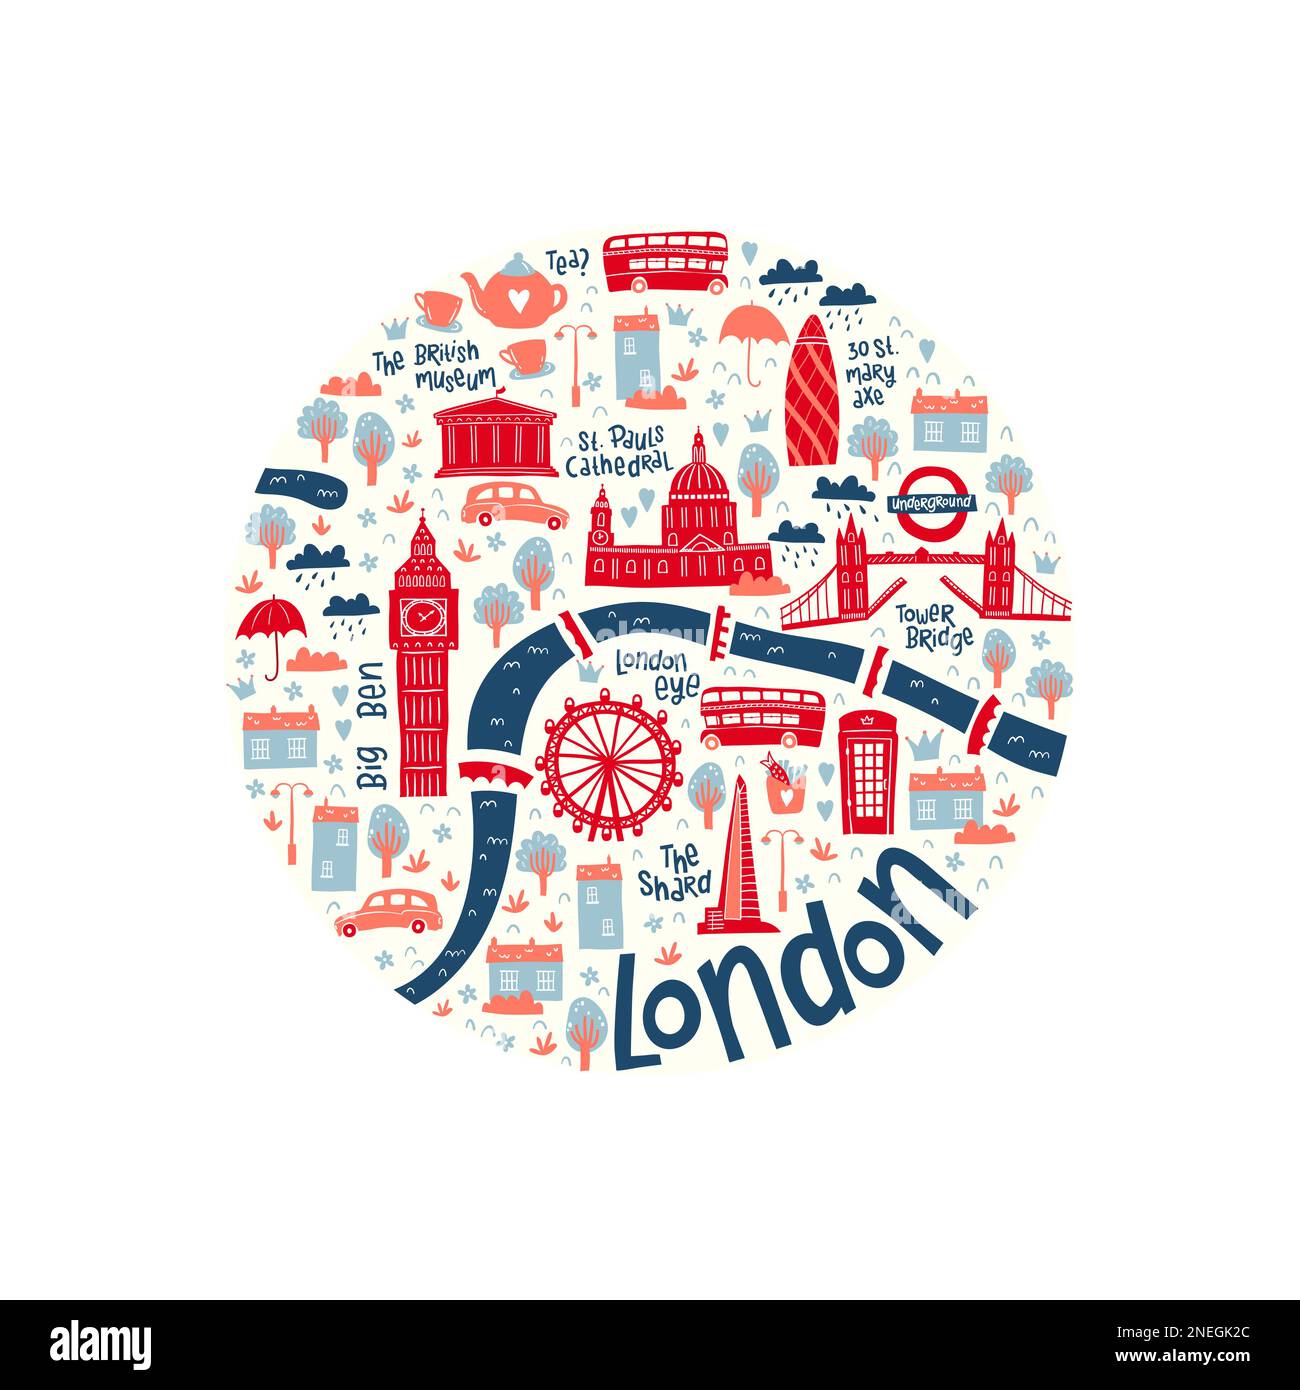 Cute hand drawn map of London with doodle elements, sights, buildings - great for postcards, prints, banners, wallpaper - vector design Stock Vector